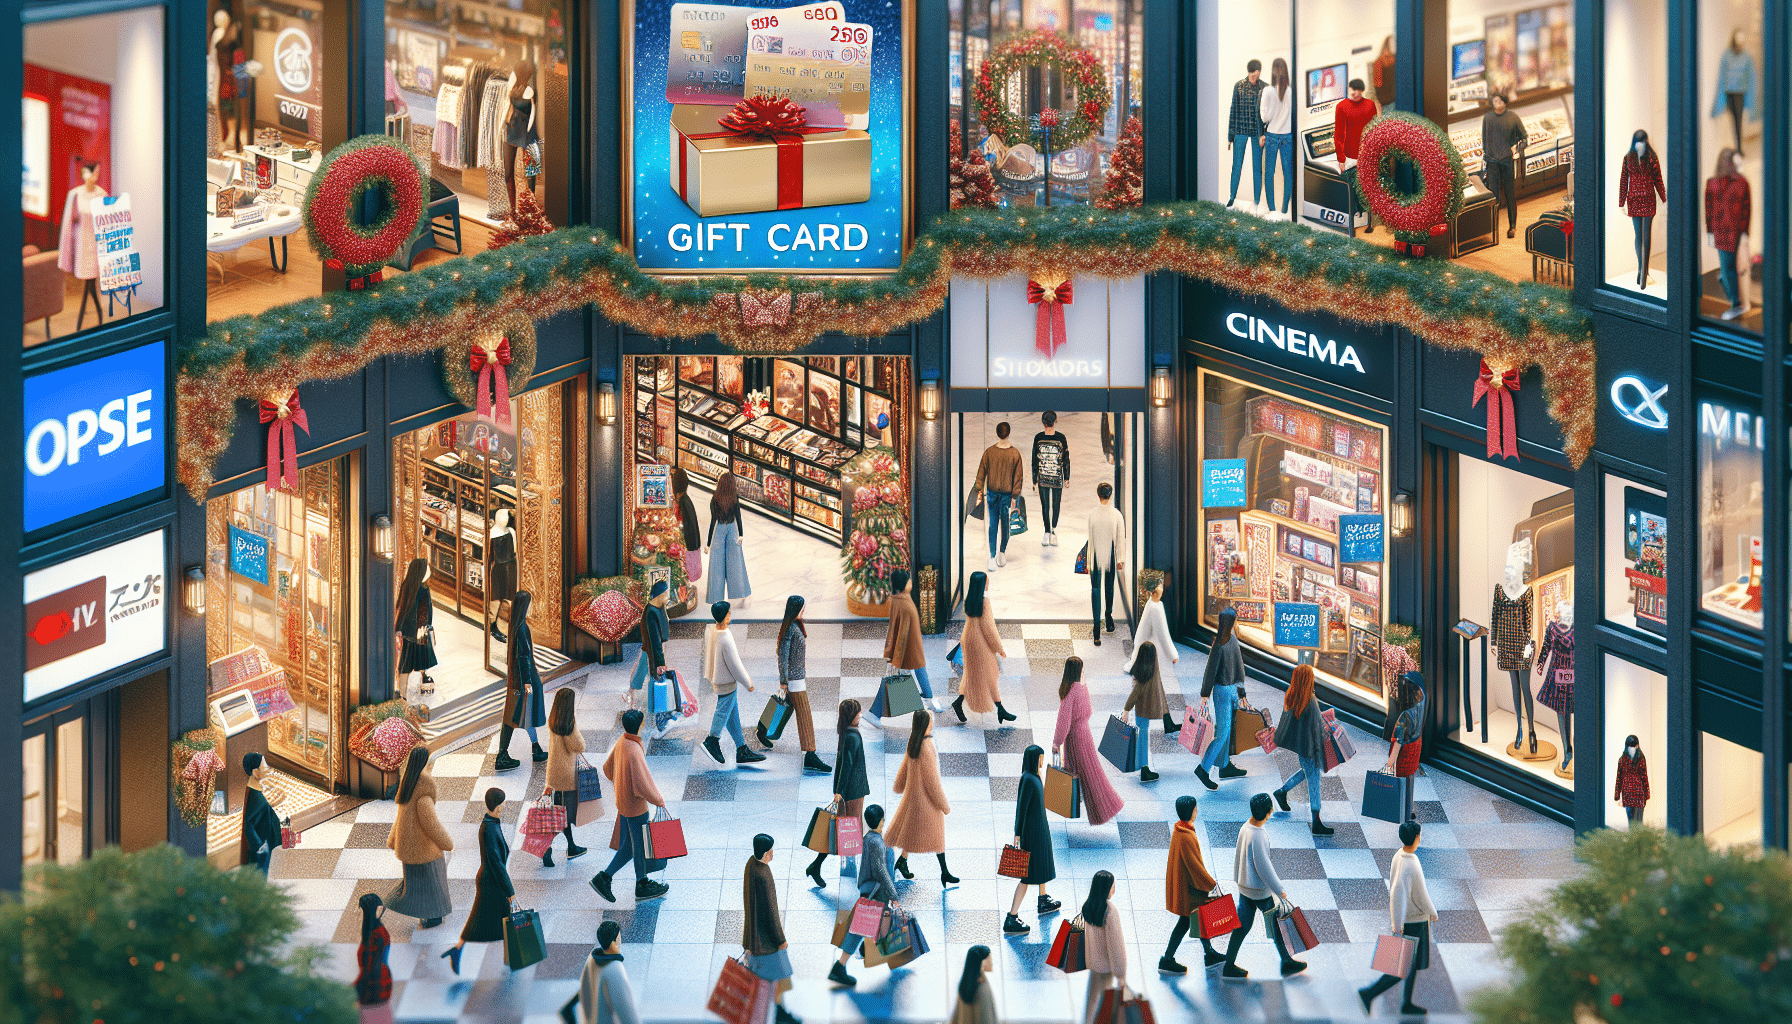 46 Retailers, Restaurants, and Movie Theaters Offer Gift Card Deals for Last-Minute Shoppers